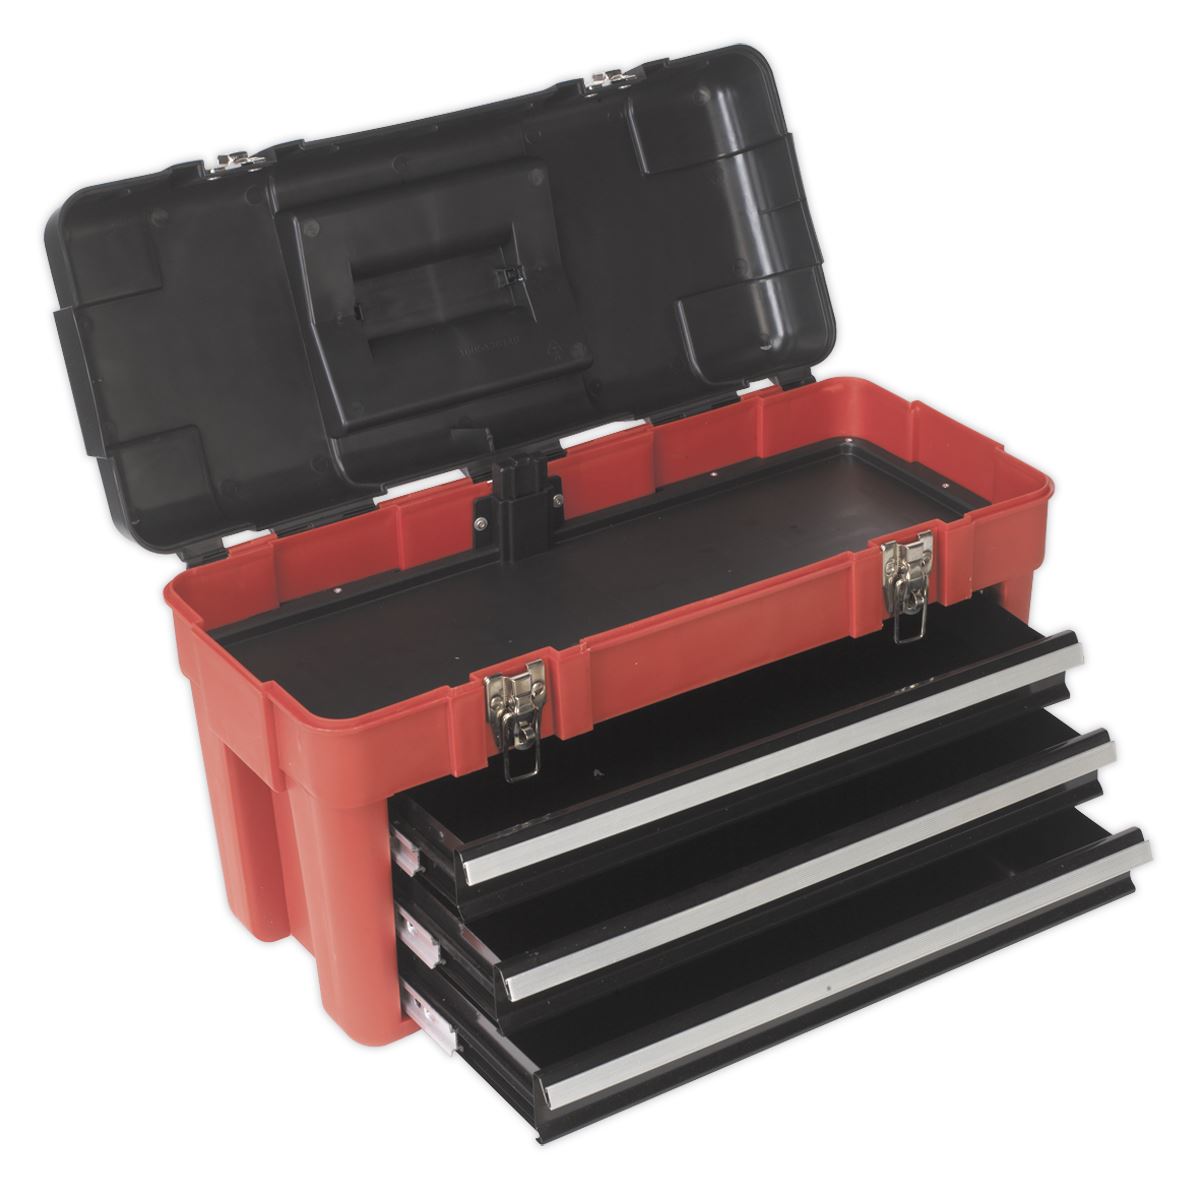 Sealey Toolbox 585mm 3 Drawer Portable